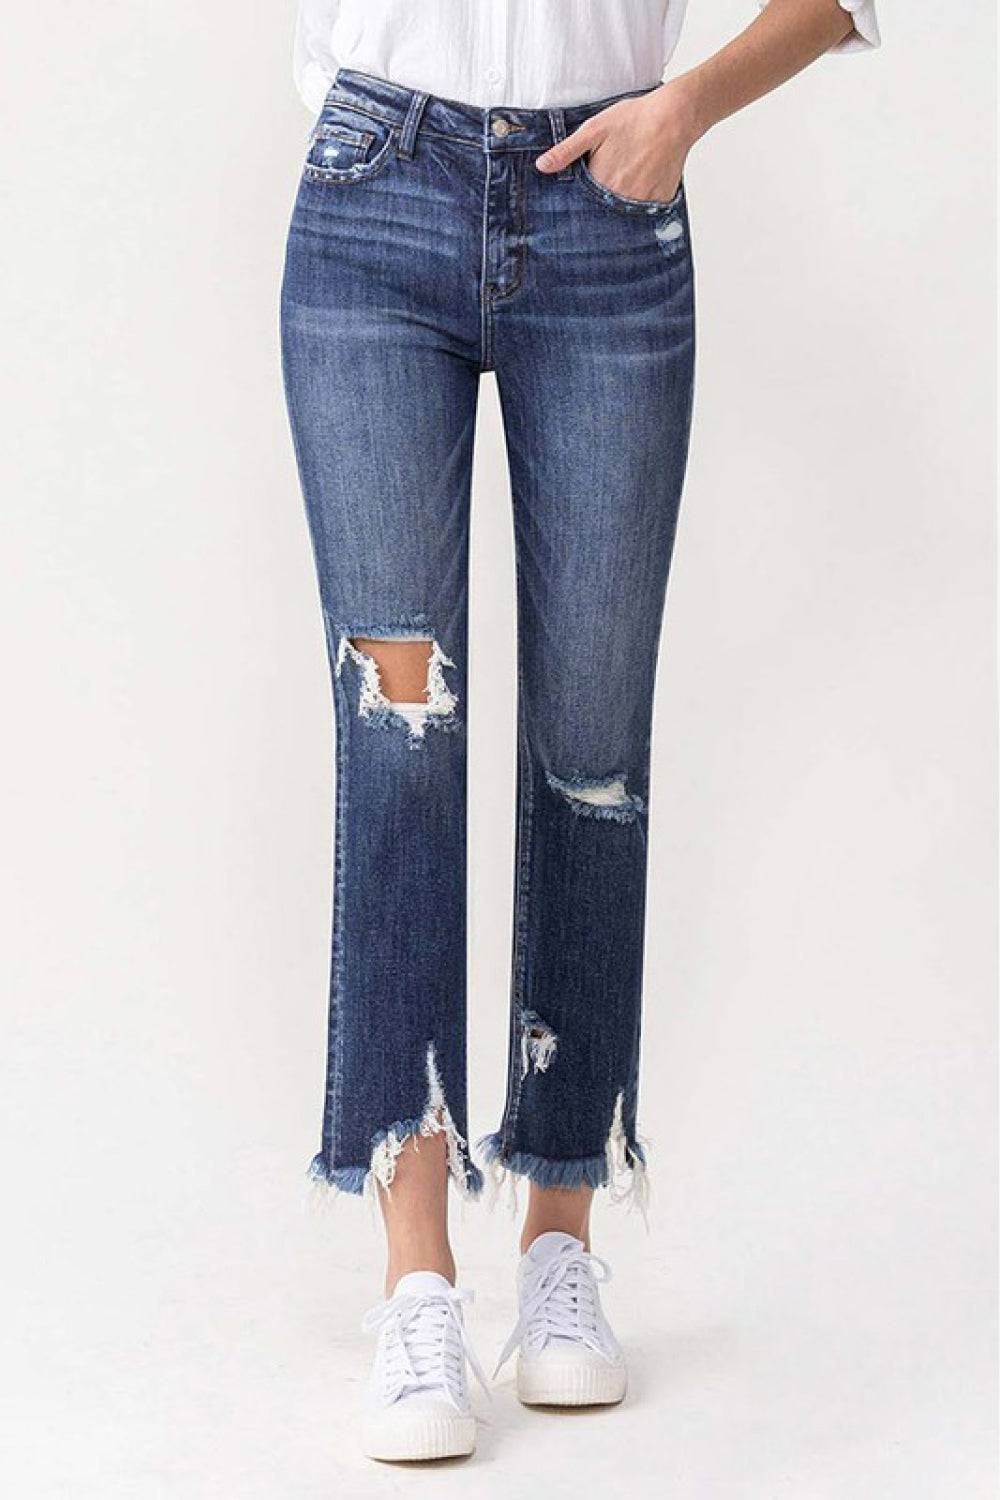 Lovervet Jackie Full Size High Rise Crop Straight Leg Jeans - Embrace the Enchanted Summer Breeze with Distressed Details and Flawless Fit - Guy Christopher